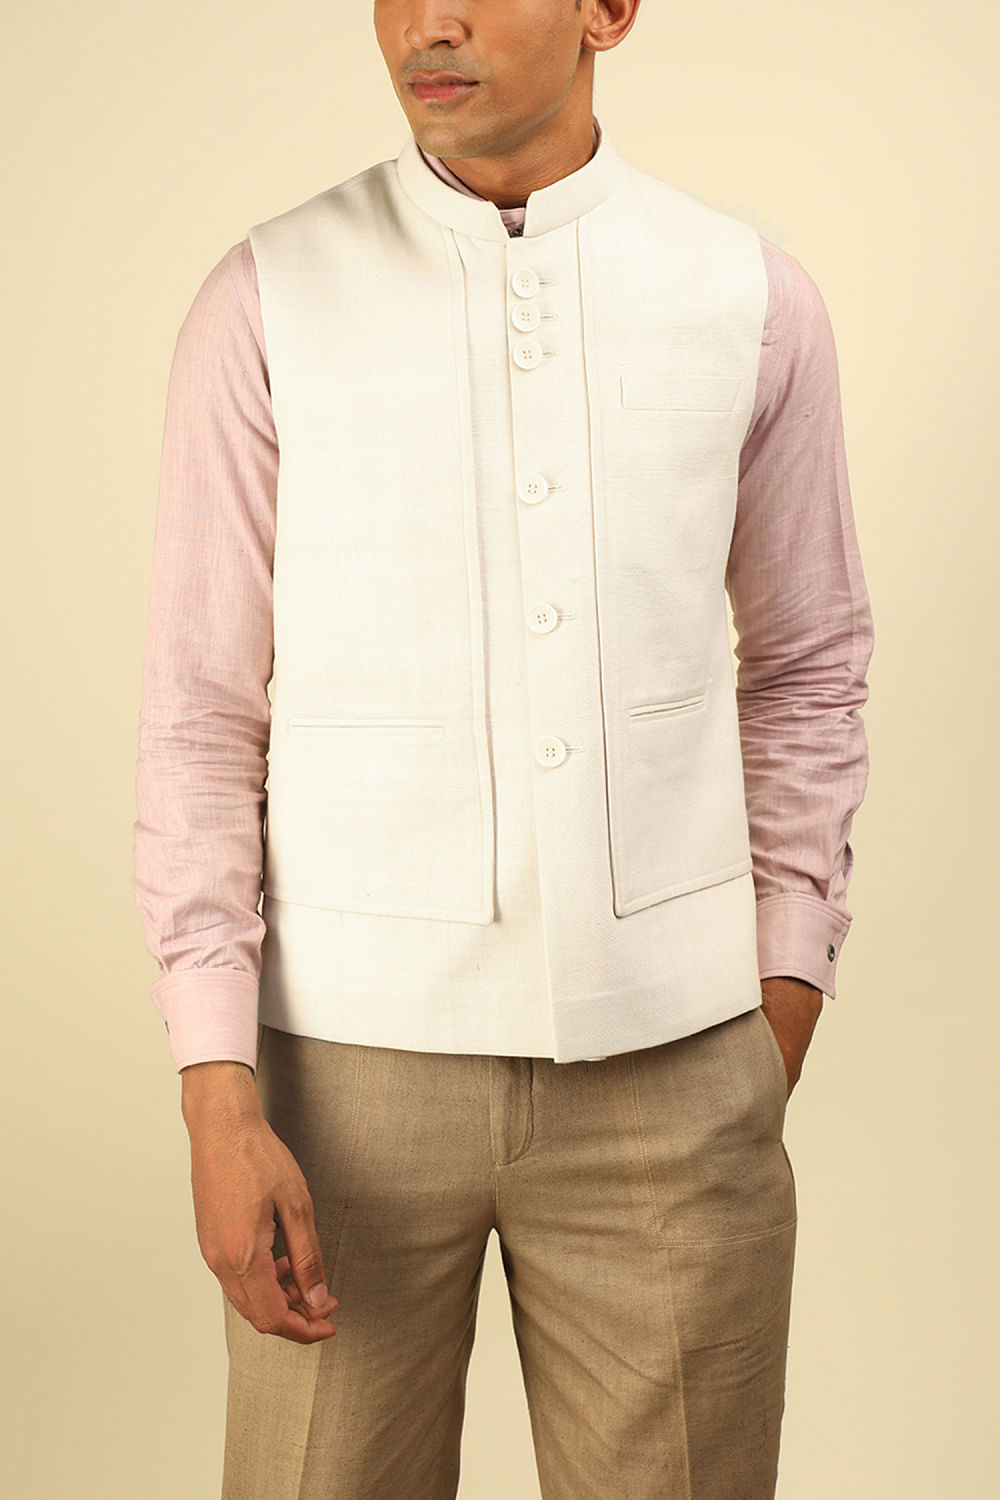 Khadi Jackets at Best Price from Manufacturers, Suppliers & Dealers